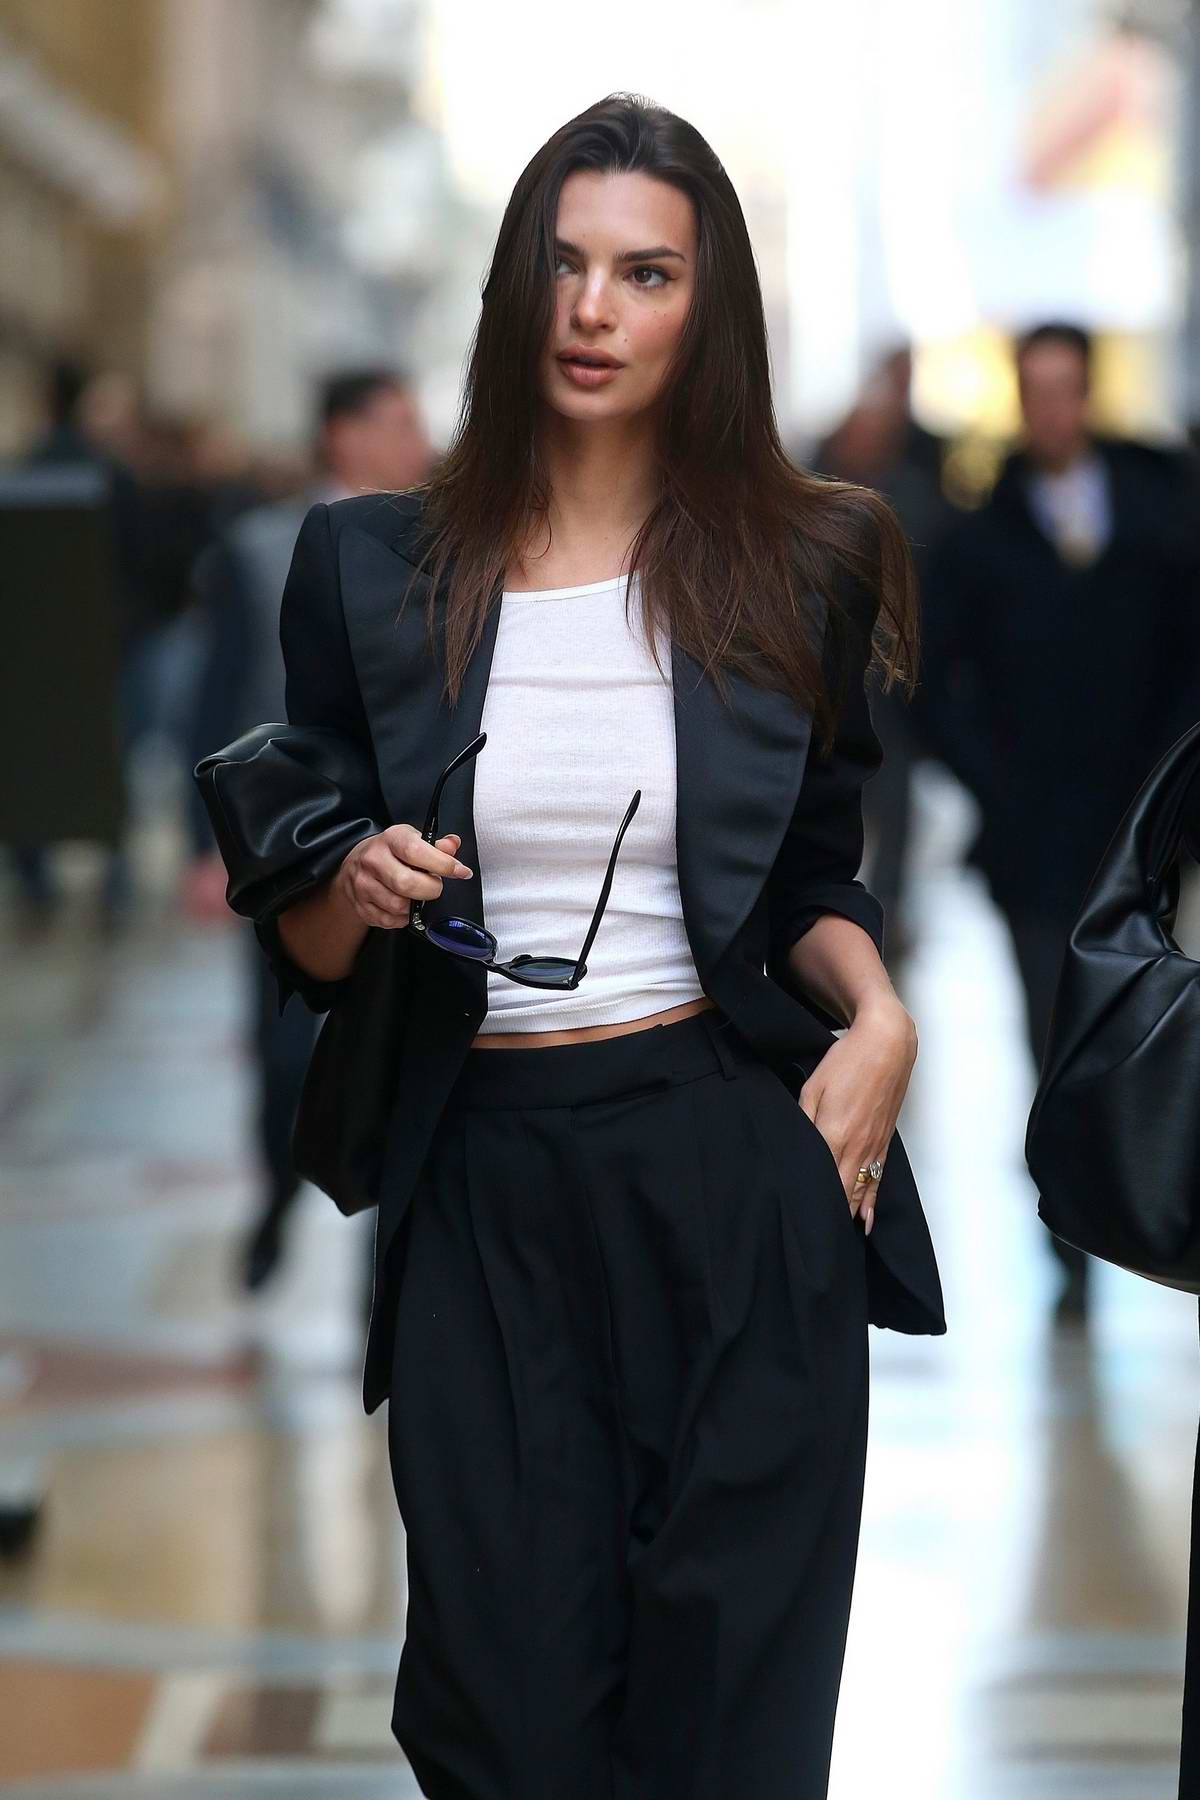 emily ratajkowski looks stylish in a black suit while out during milan ...